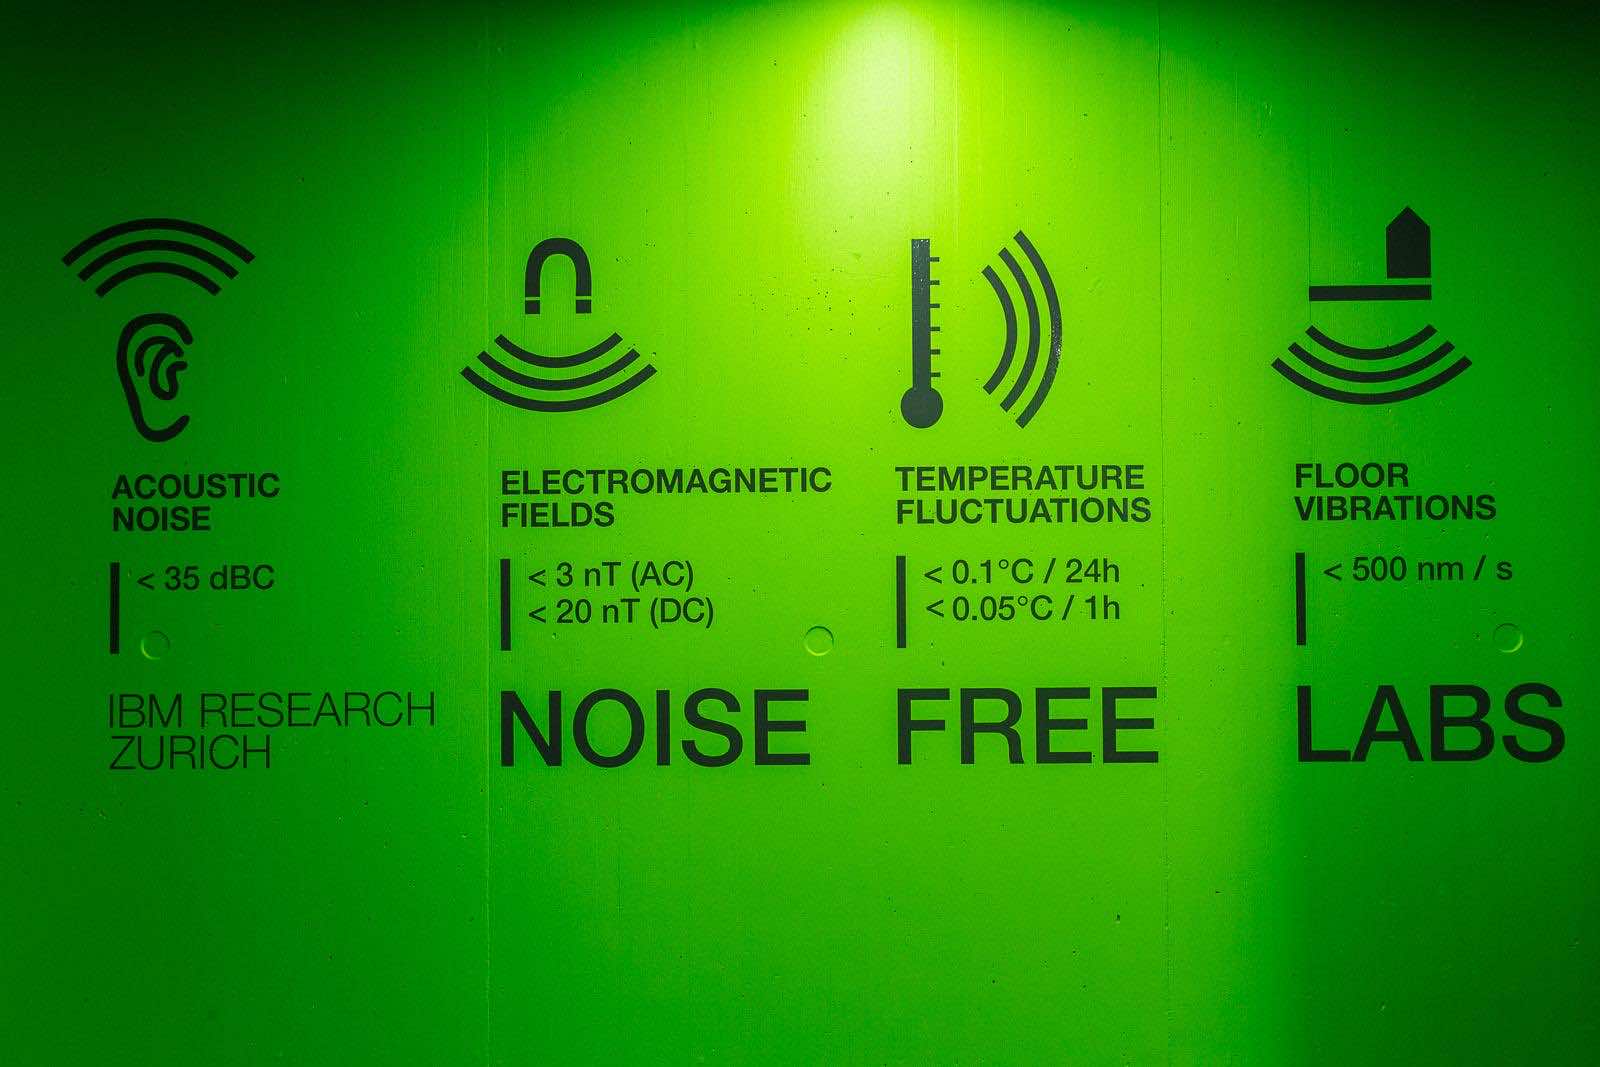 Noise Free labs